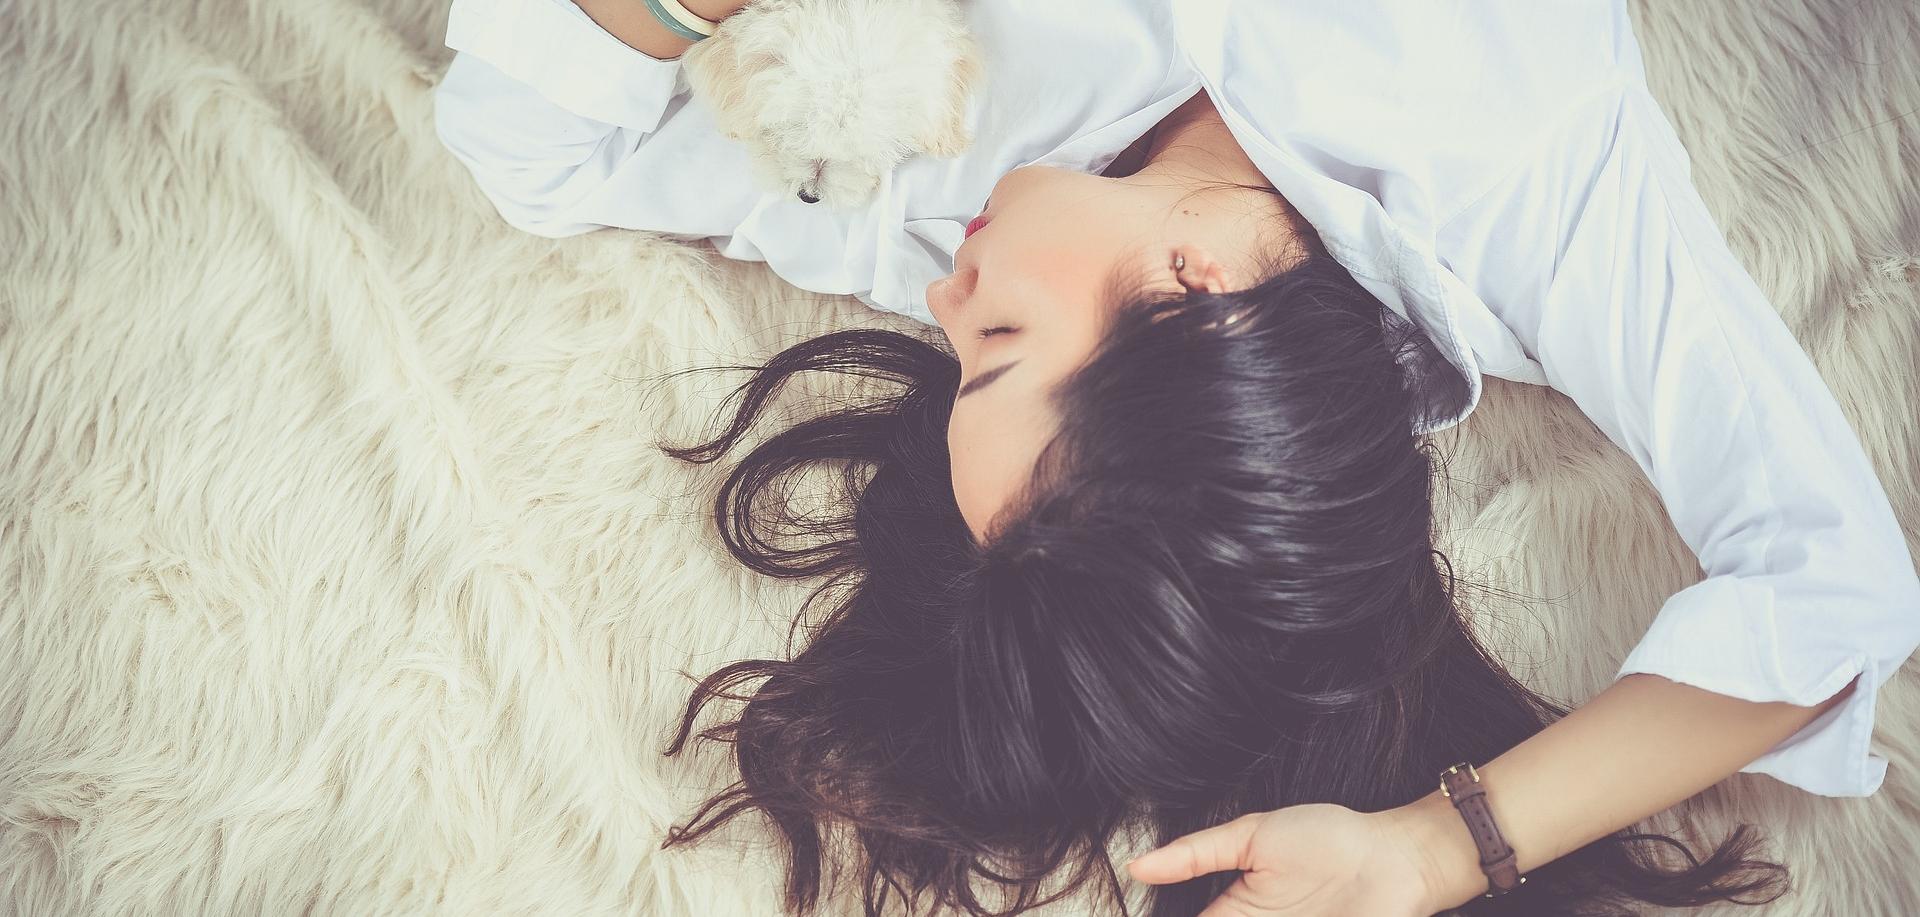 woman with long dark hair lying on bed with small white dog